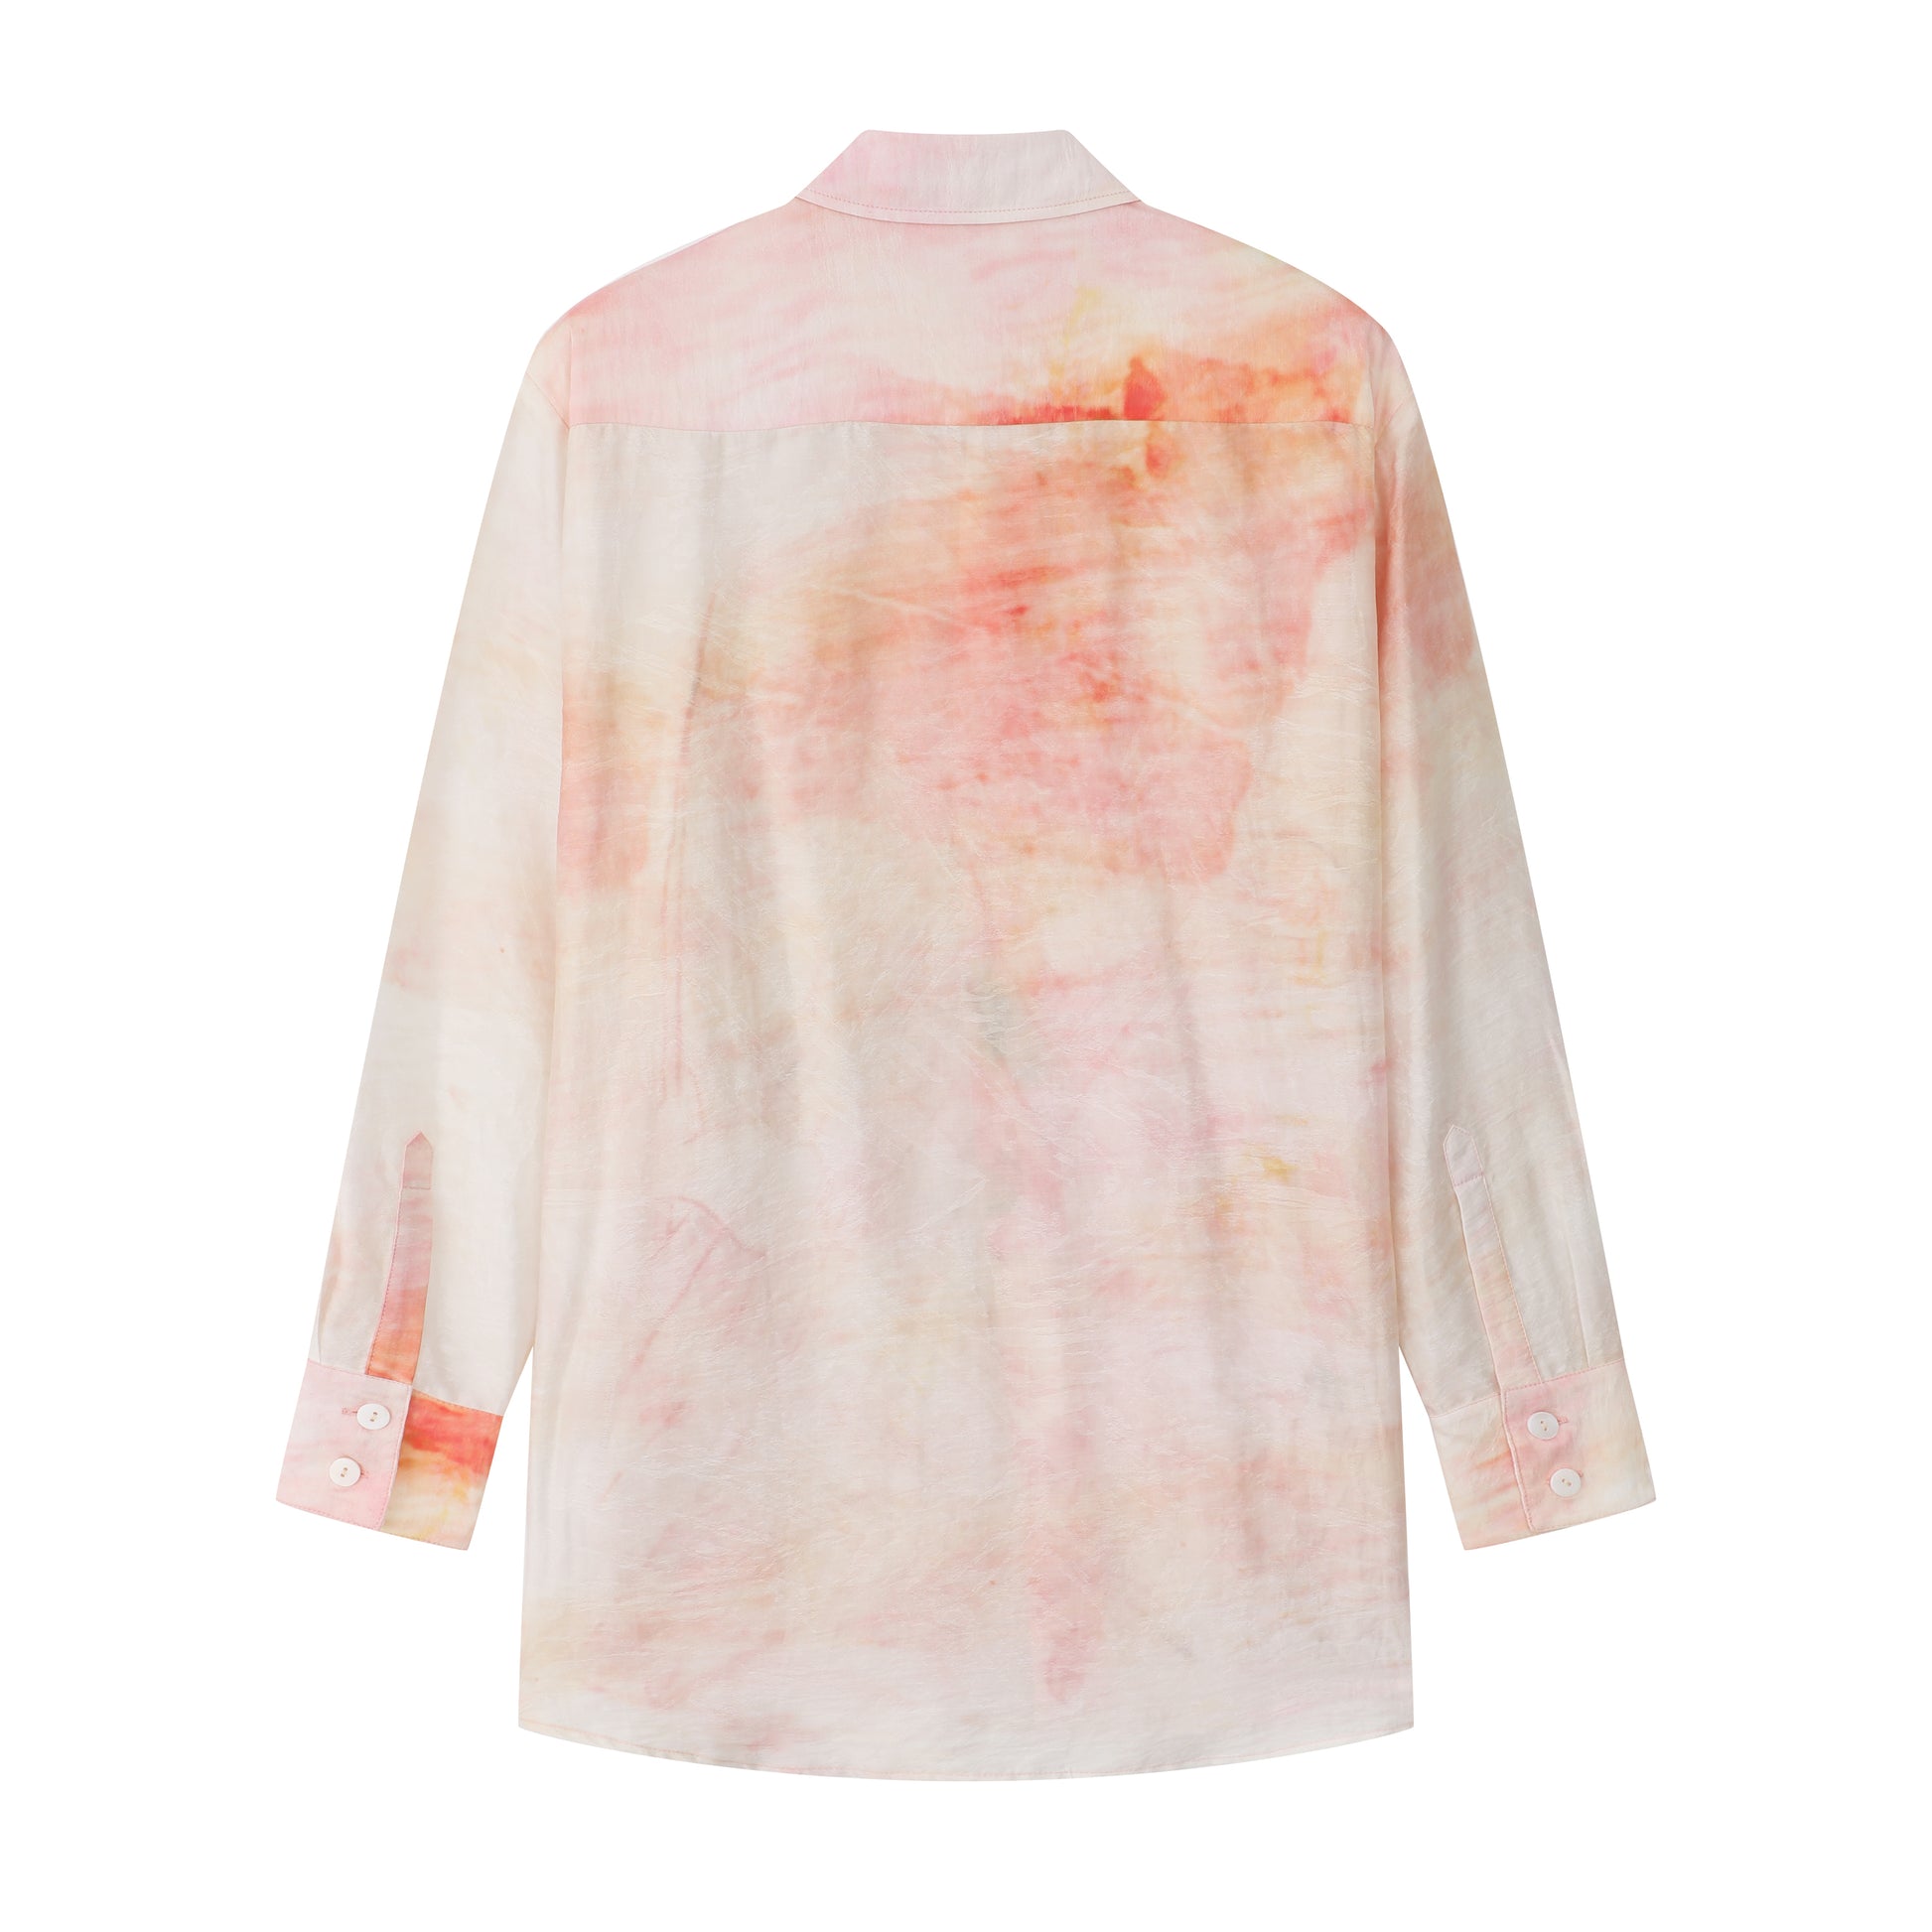 Pink Gradient Orchid Printed Shirt